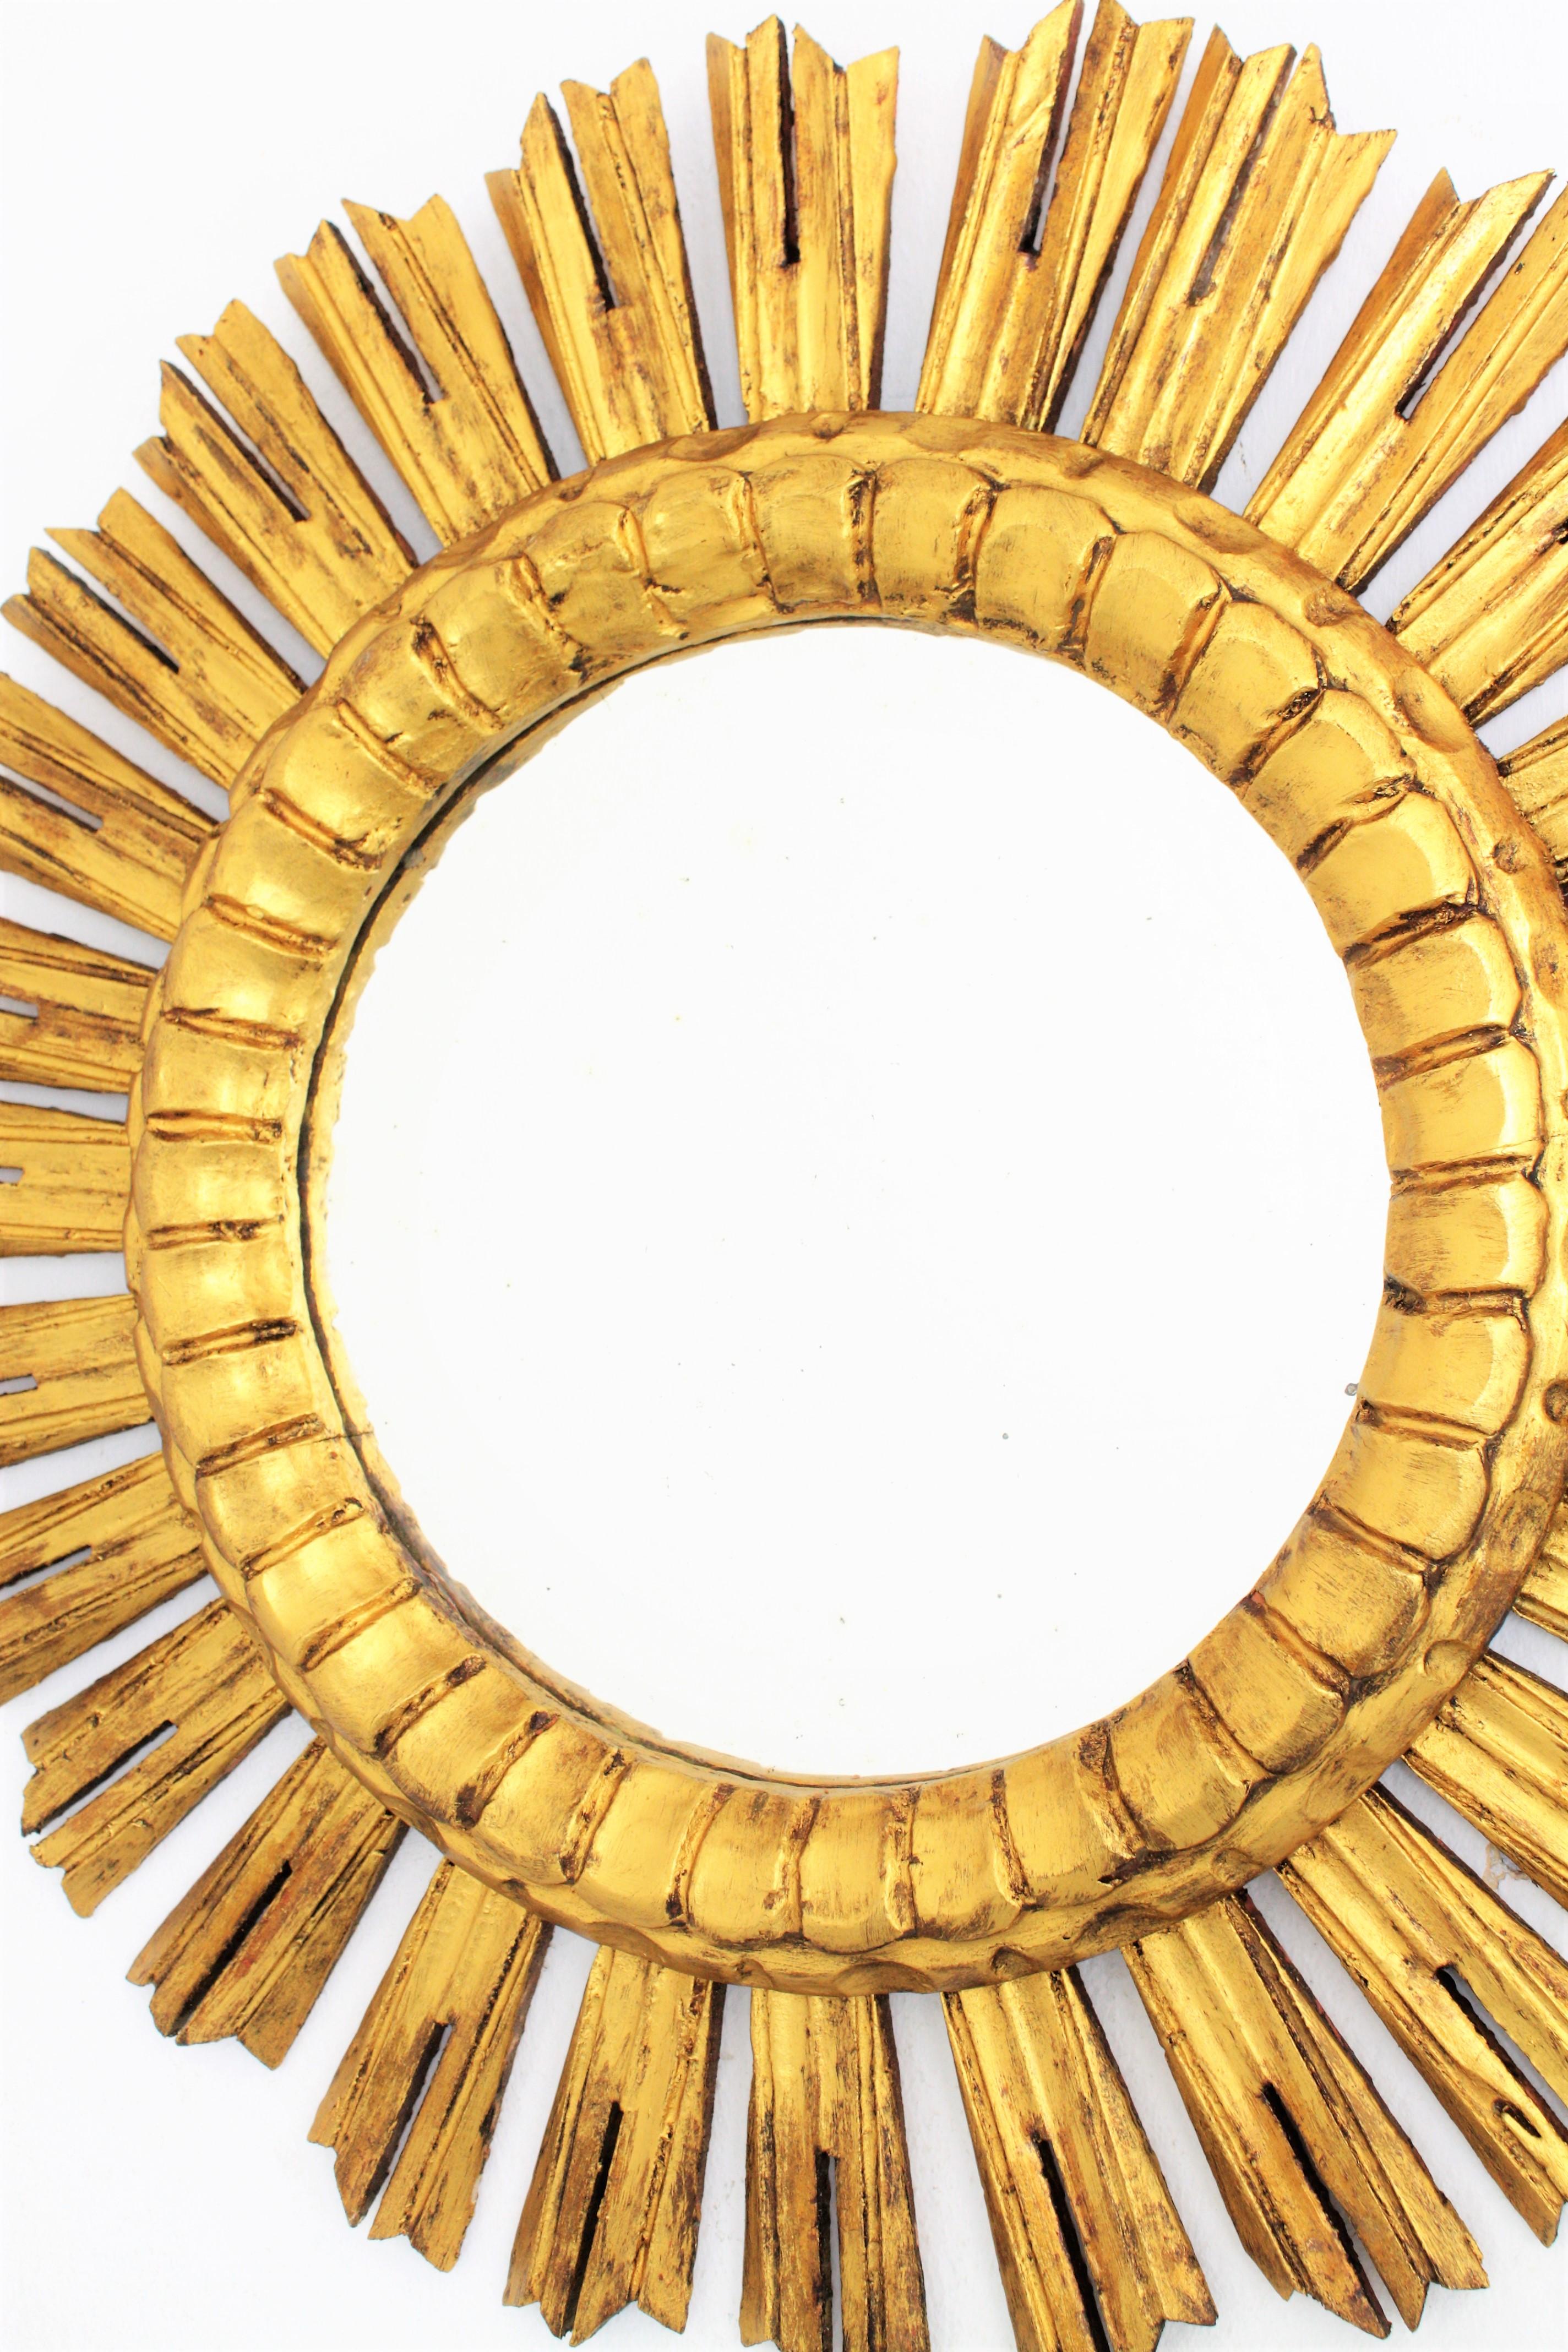 20th Century Sunburst Mirror in Carved Giltwood in Baroque Style, France, 1930s For Sale